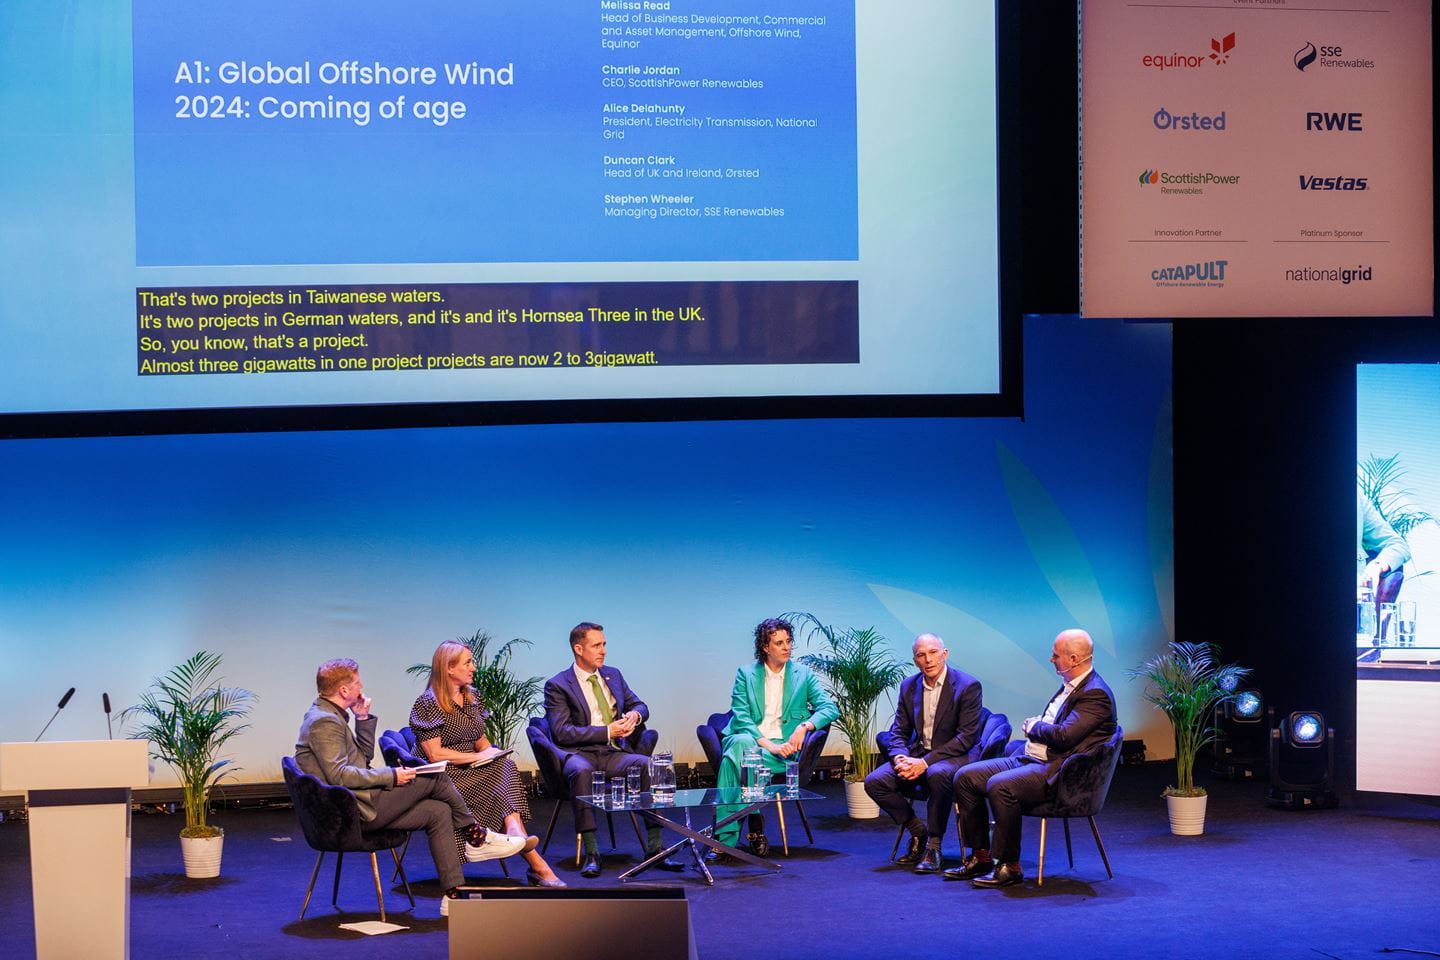 Duncan Clark, Head of Ørsted UK & Ireland speaking during a panel discussion about the offshore wind industry’s evolution, key successes to build on and challenges to expect in the future.  